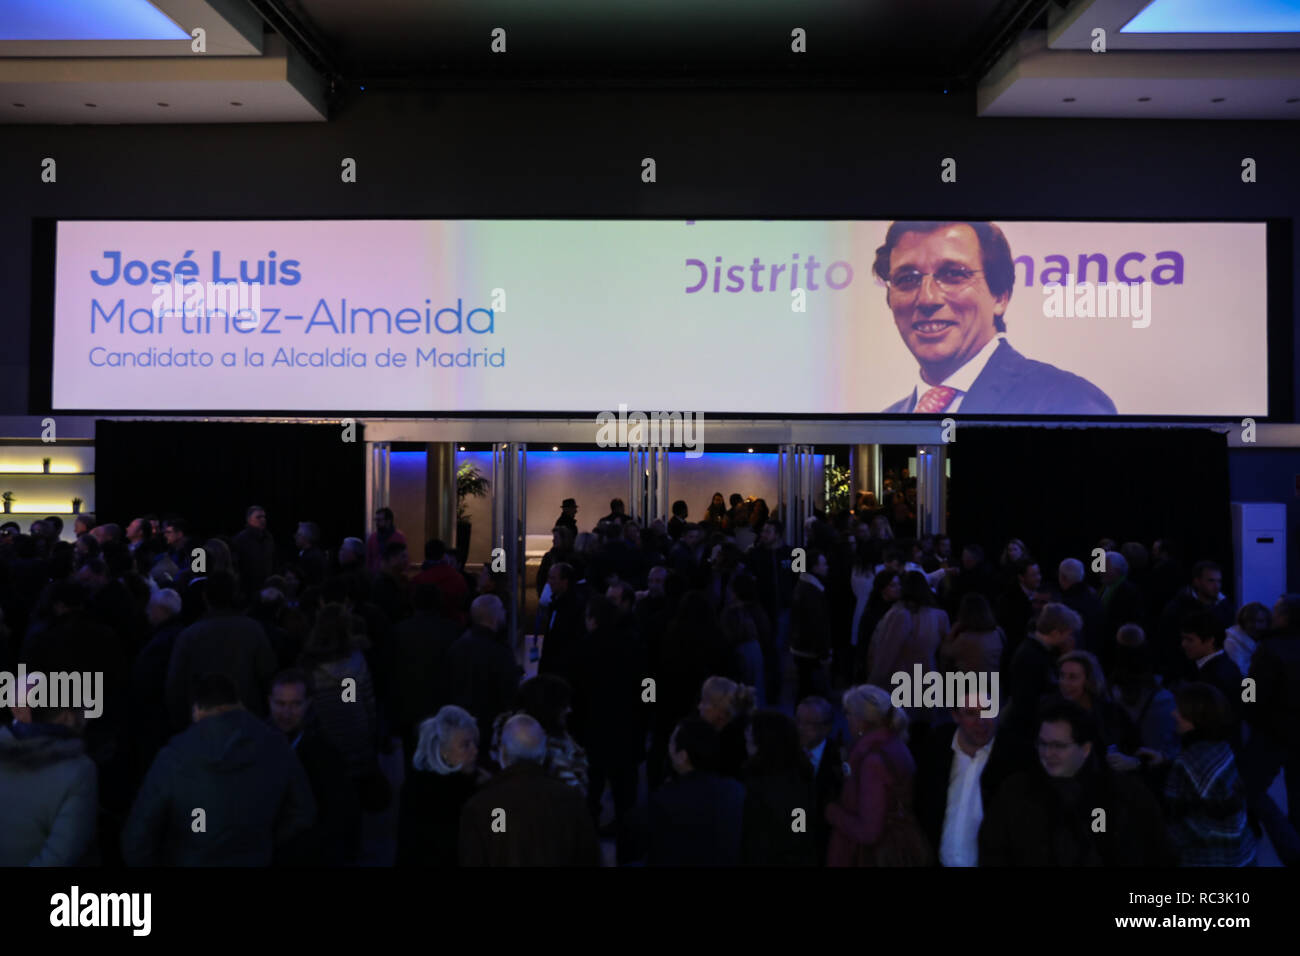 Madrid, Spain. 13th Janaury 2019. Poster announcing Jose Luis Martinez-Almeida as a candidate. The PP of Madrid has celebrated this Sunday a multitudinous act in the theater Goya the presentation of José Luis Martínez-Almeida and Isabel Díaz Ayuso that will be the candidates of the PP to the City council and the Community of Madrid, respectively, for the next regional and local elections of May on Jan 13, 2019 in Madrid, Spain Credit: Jesús Hellin/Alamy Live News Stock Photo